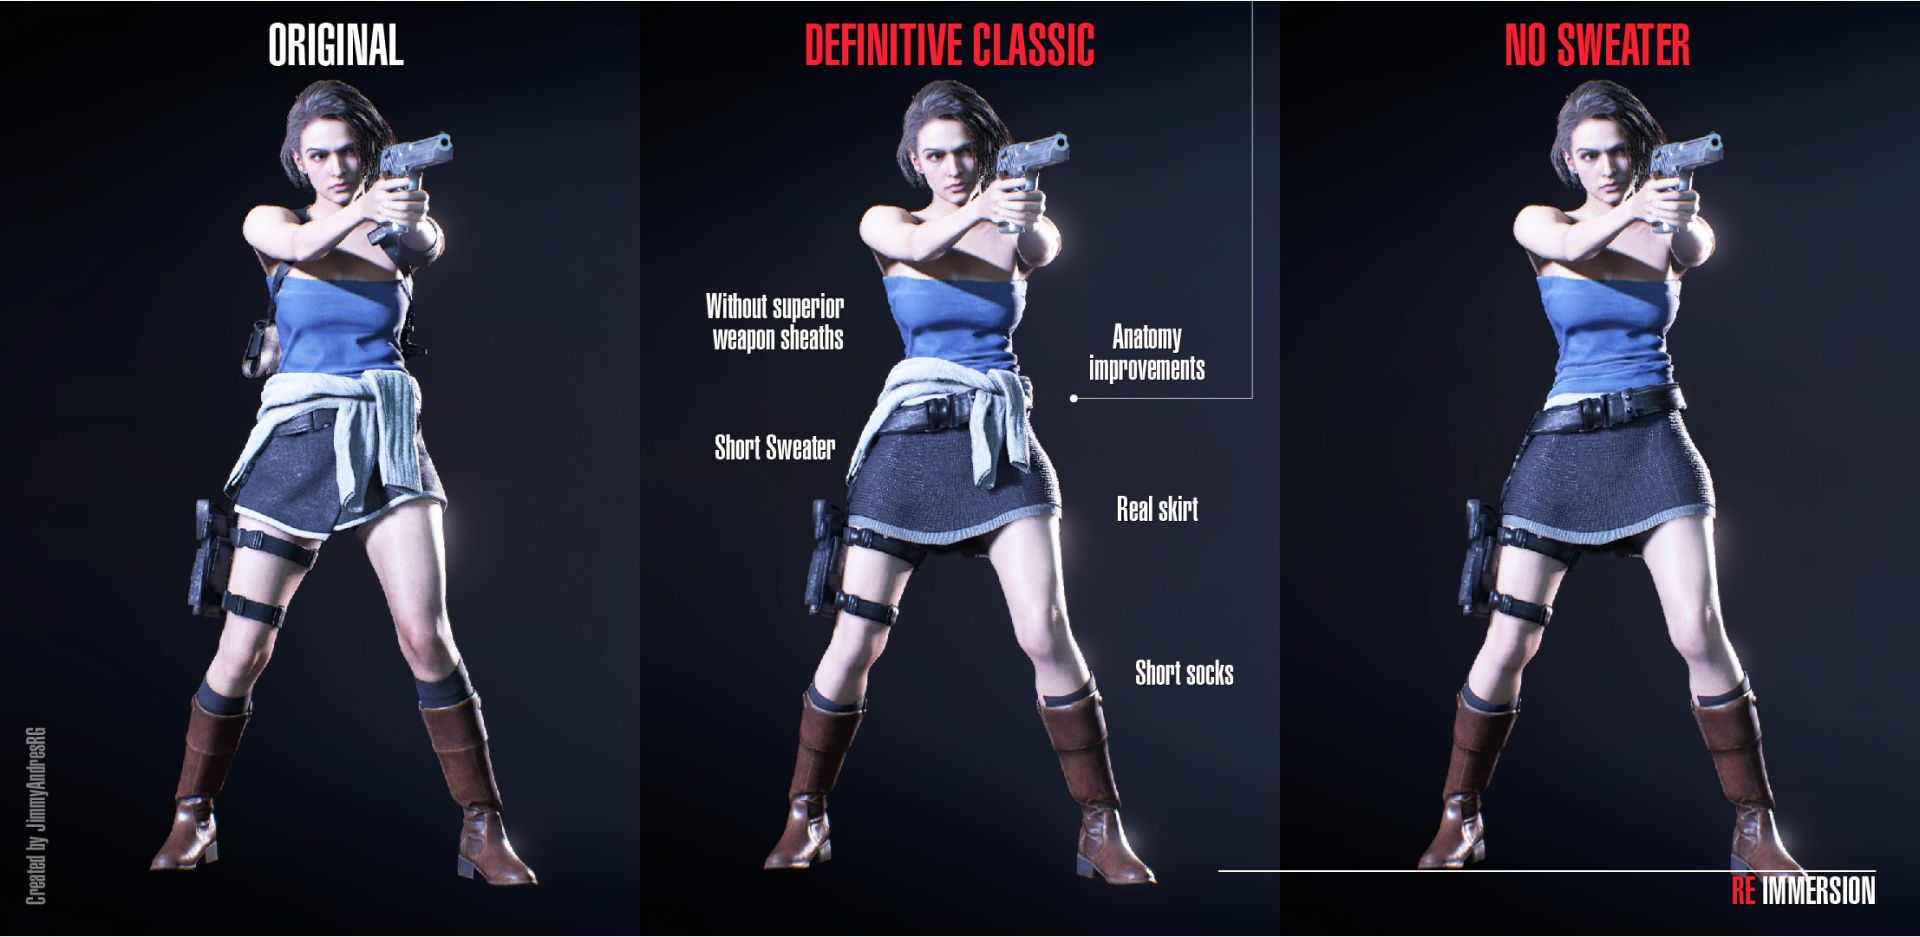 Resident Evil 3 remake mod adds 'classic Jill face and costume' -  GameRevolution